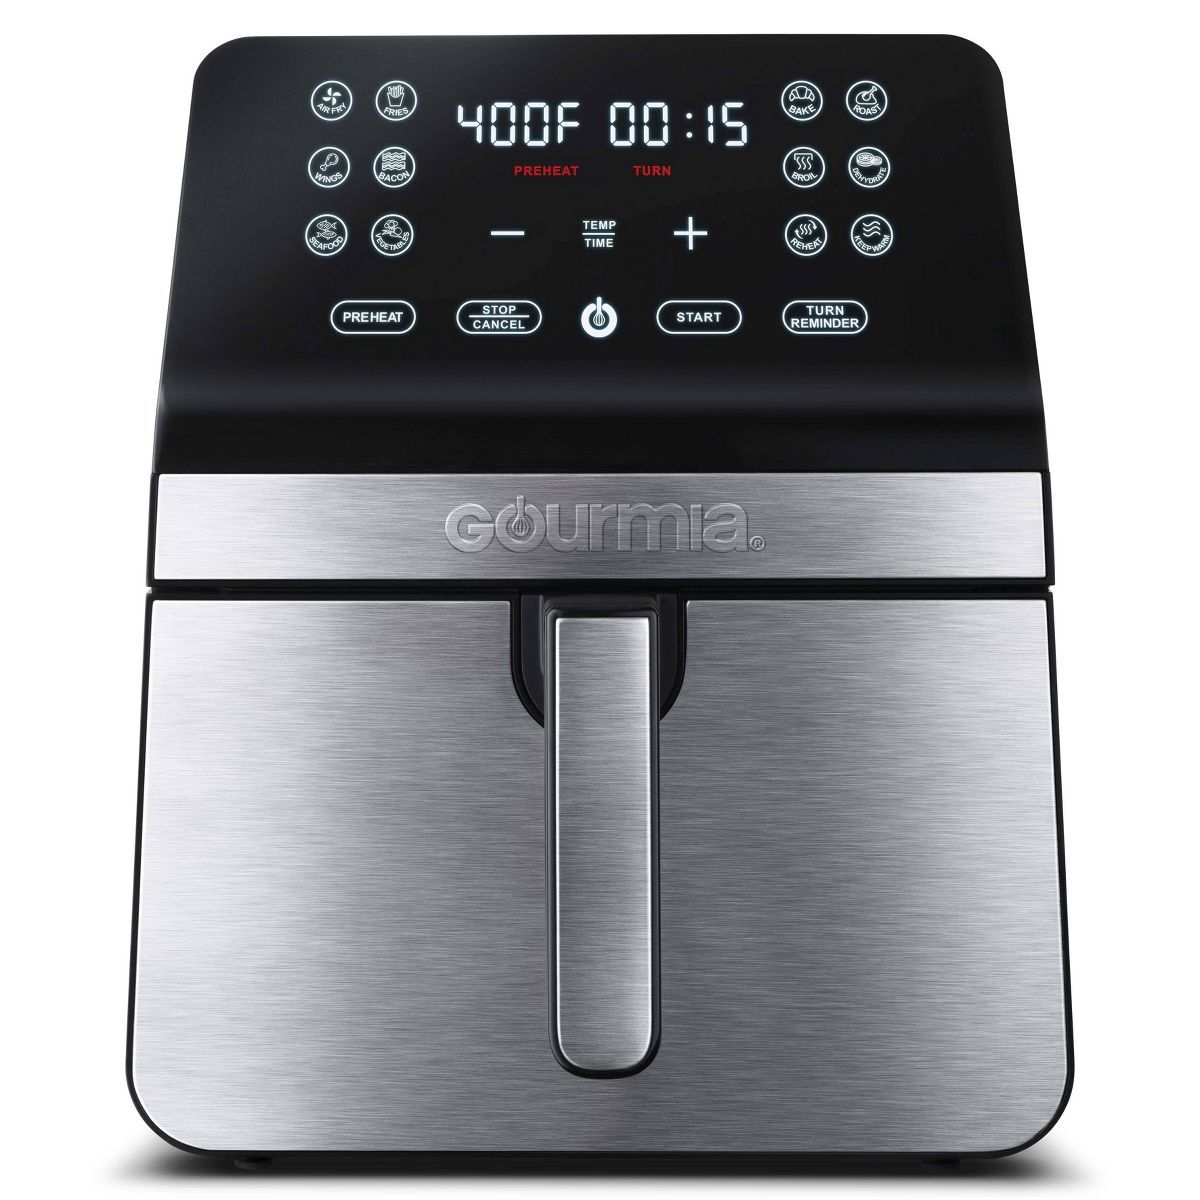 Gourmia 8-Quart Digital Air Fryer, with 12 One-Touch Functions & Guided Cooking - Stainless Steel | Target